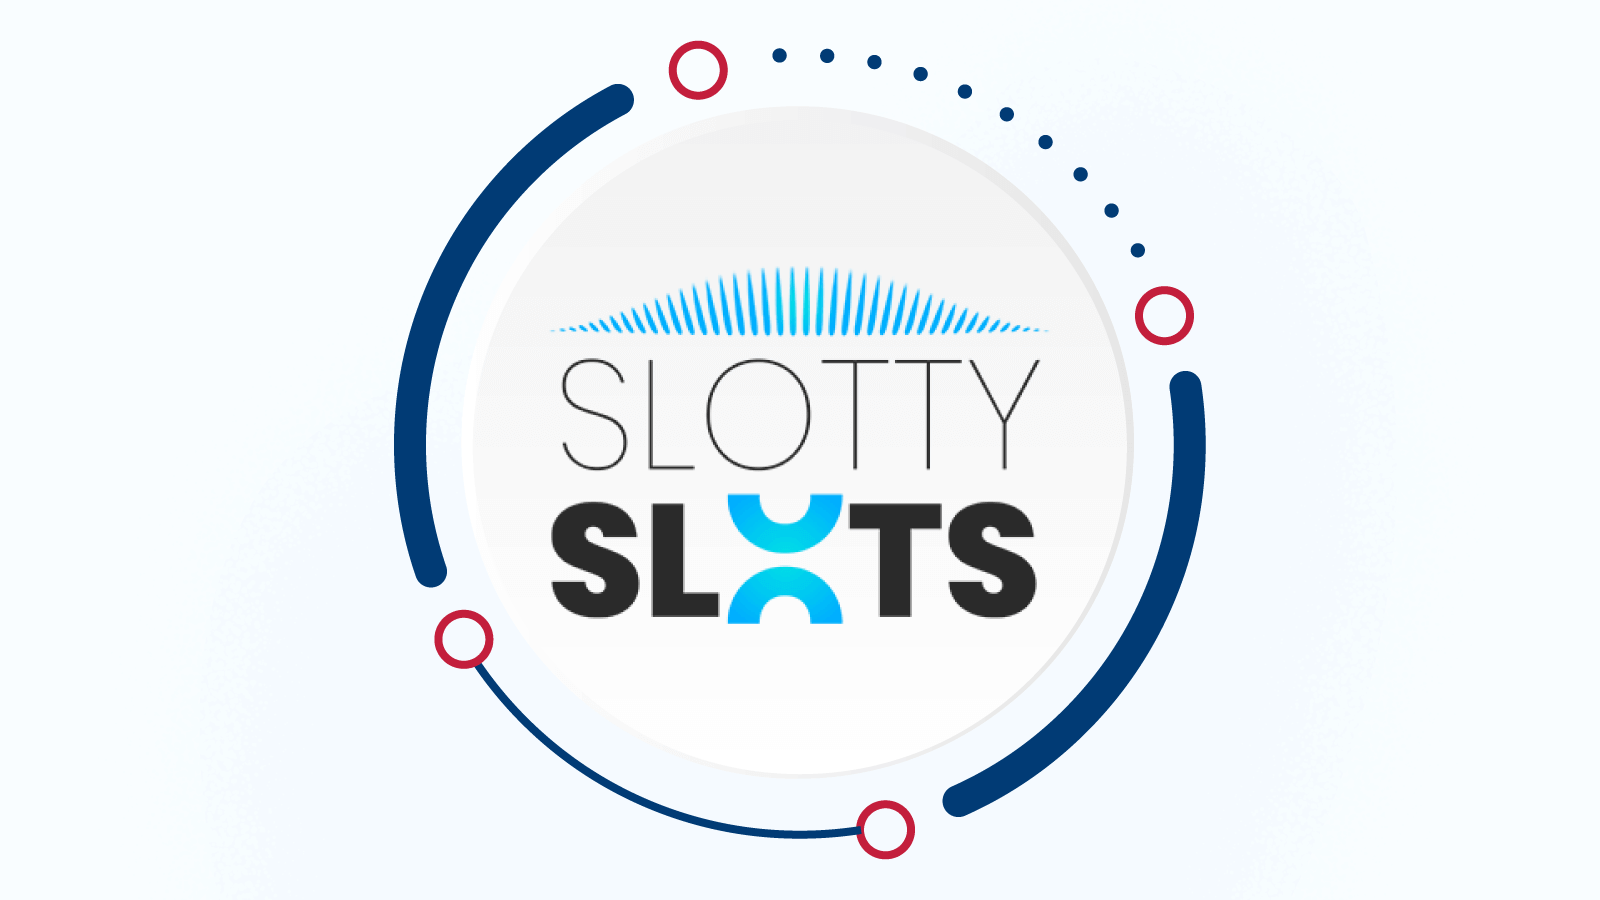 10% Cashback up to ¥200 at Slotty Slots Casino The best casino cashback on losses